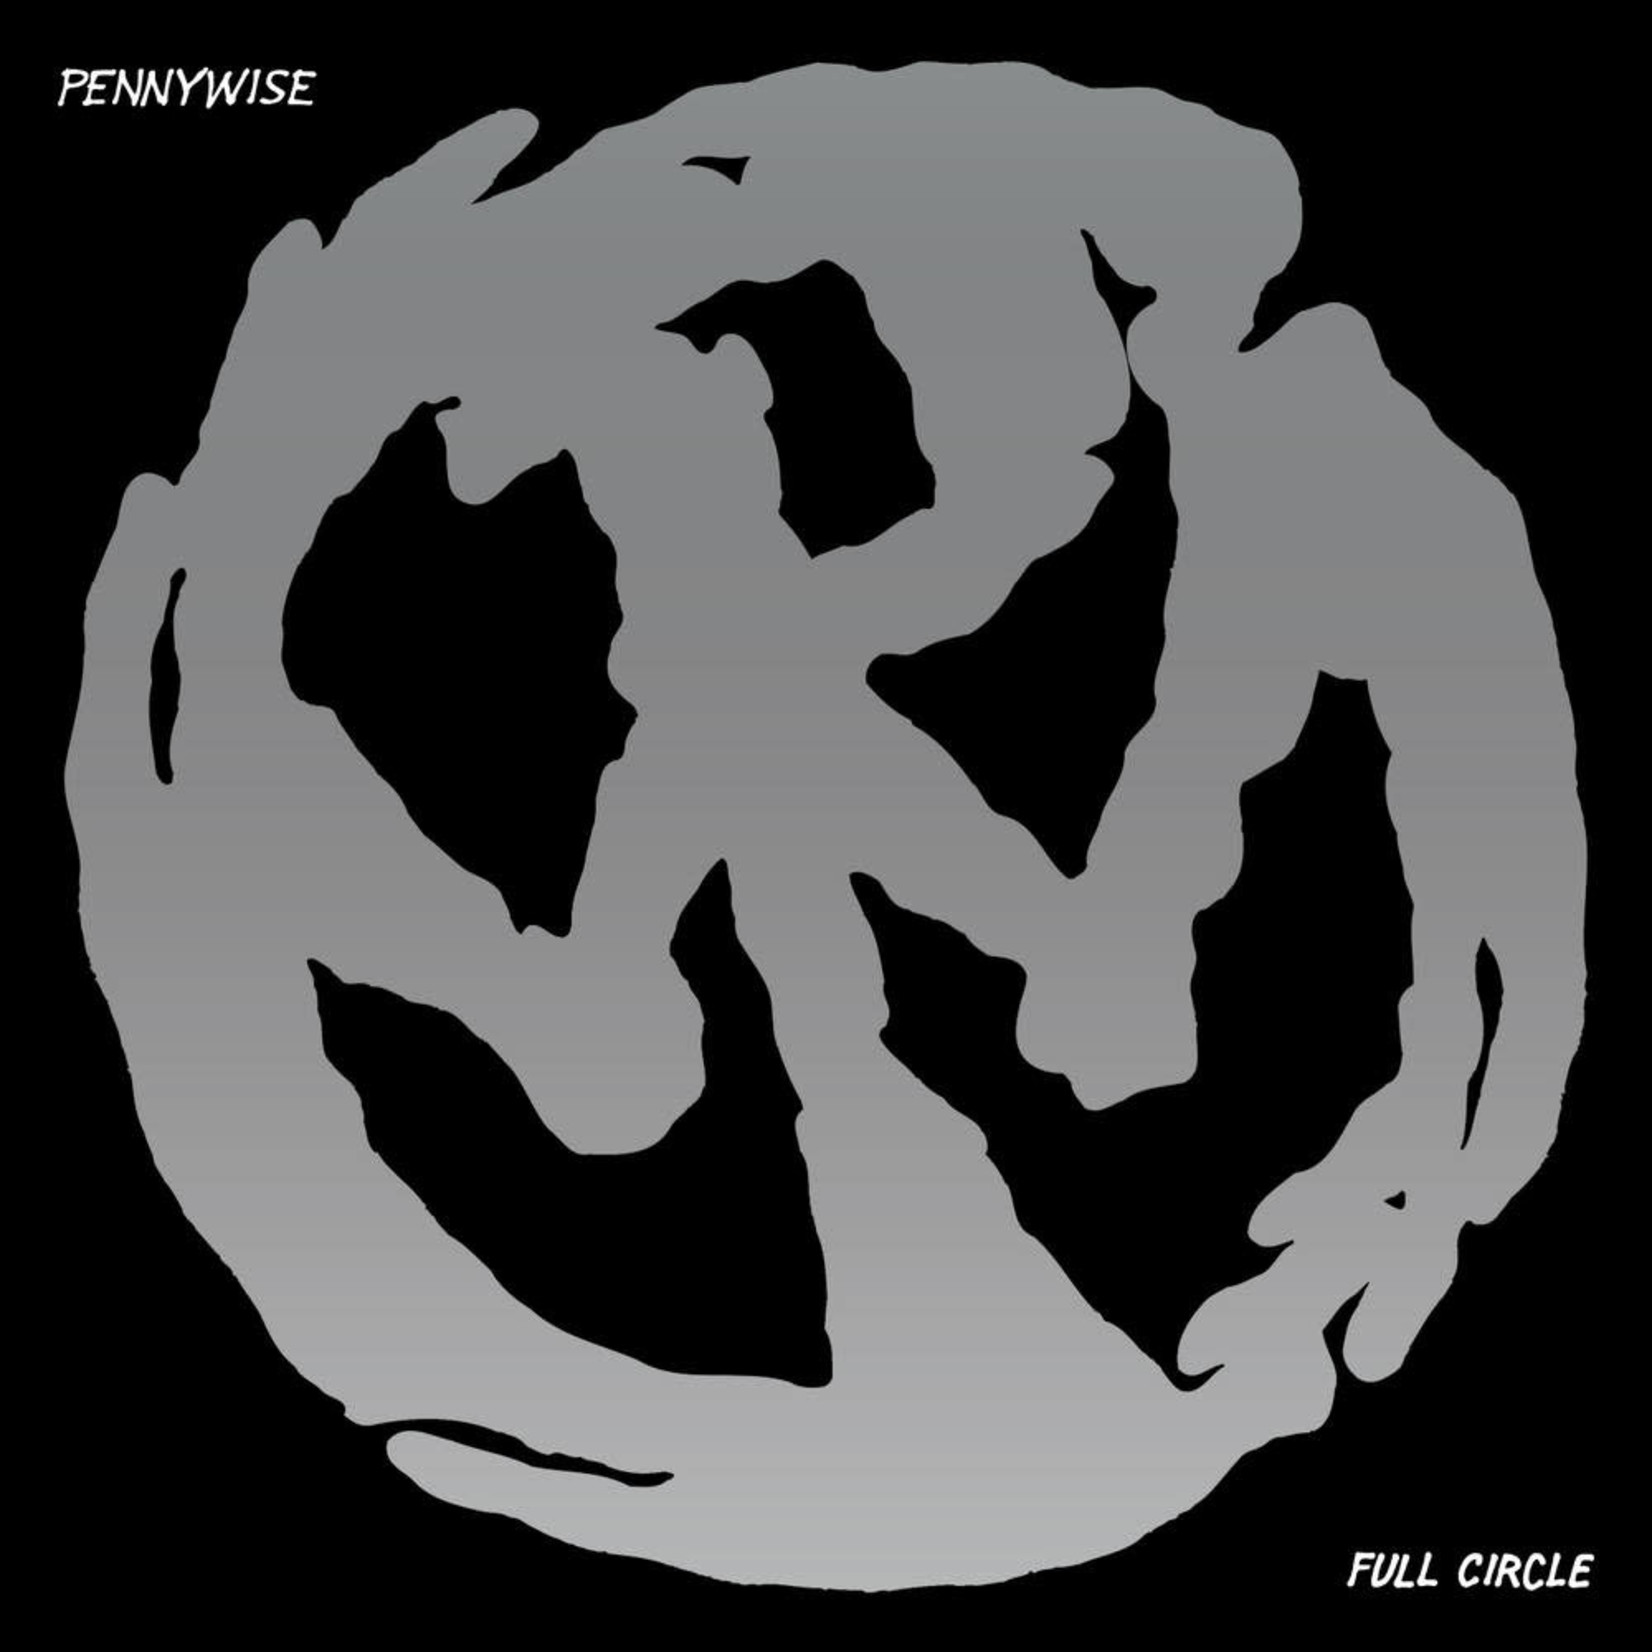 [New] Pennywise - Full Circle (25th anniversary, silver splatter vinyl)